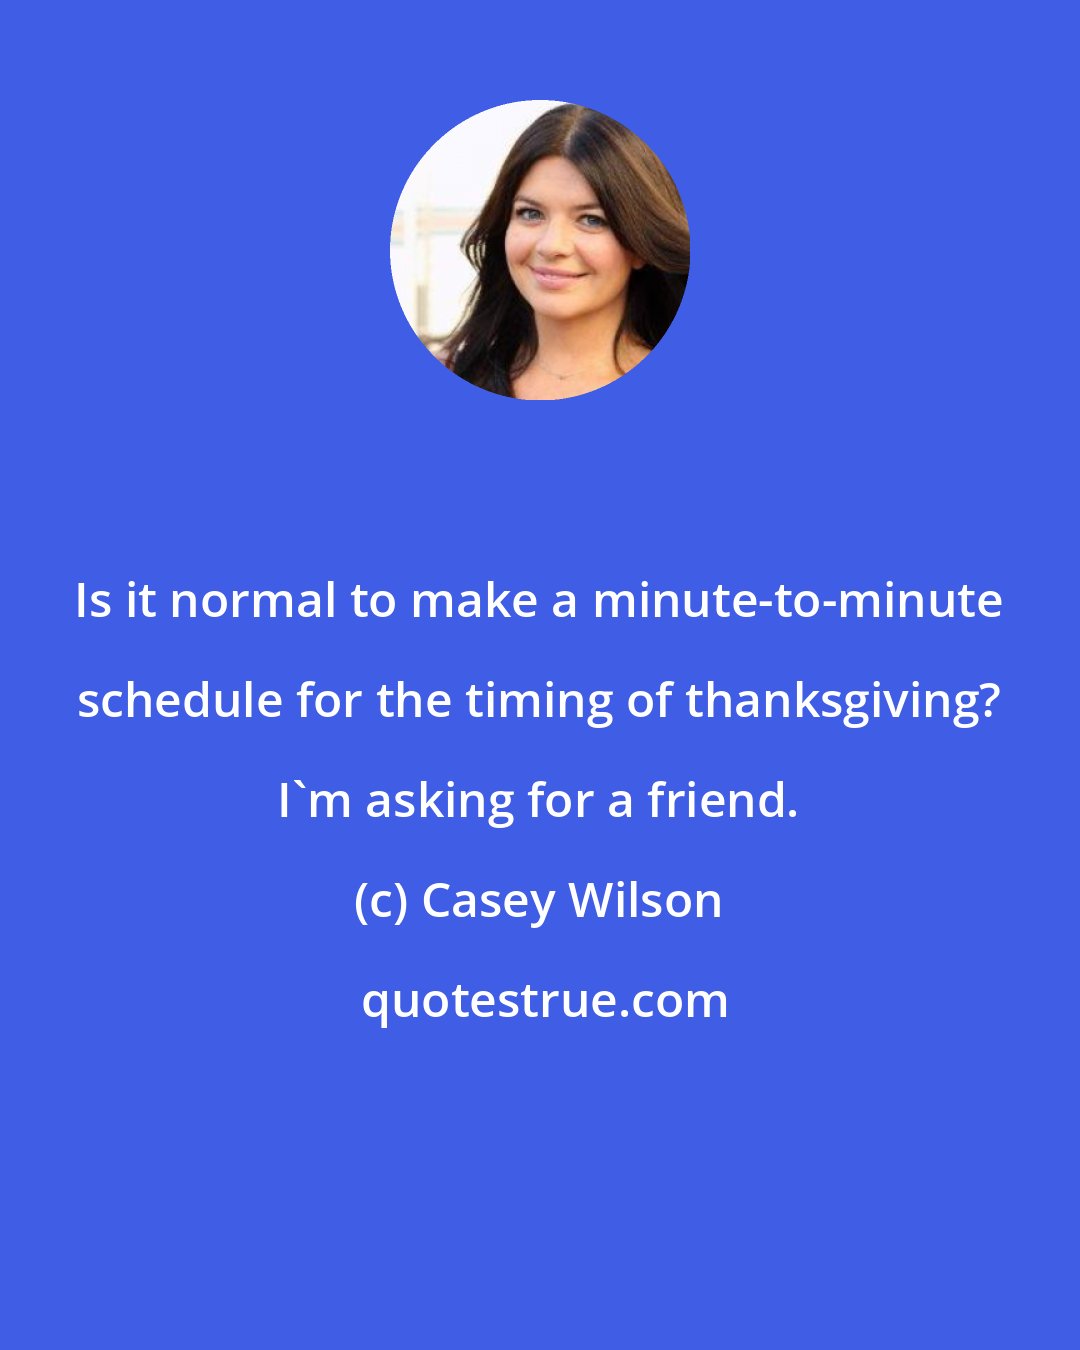 Casey Wilson: Is it normal to make a minute-to-minute schedule for the timing of thanksgiving? I'm asking for a friend.